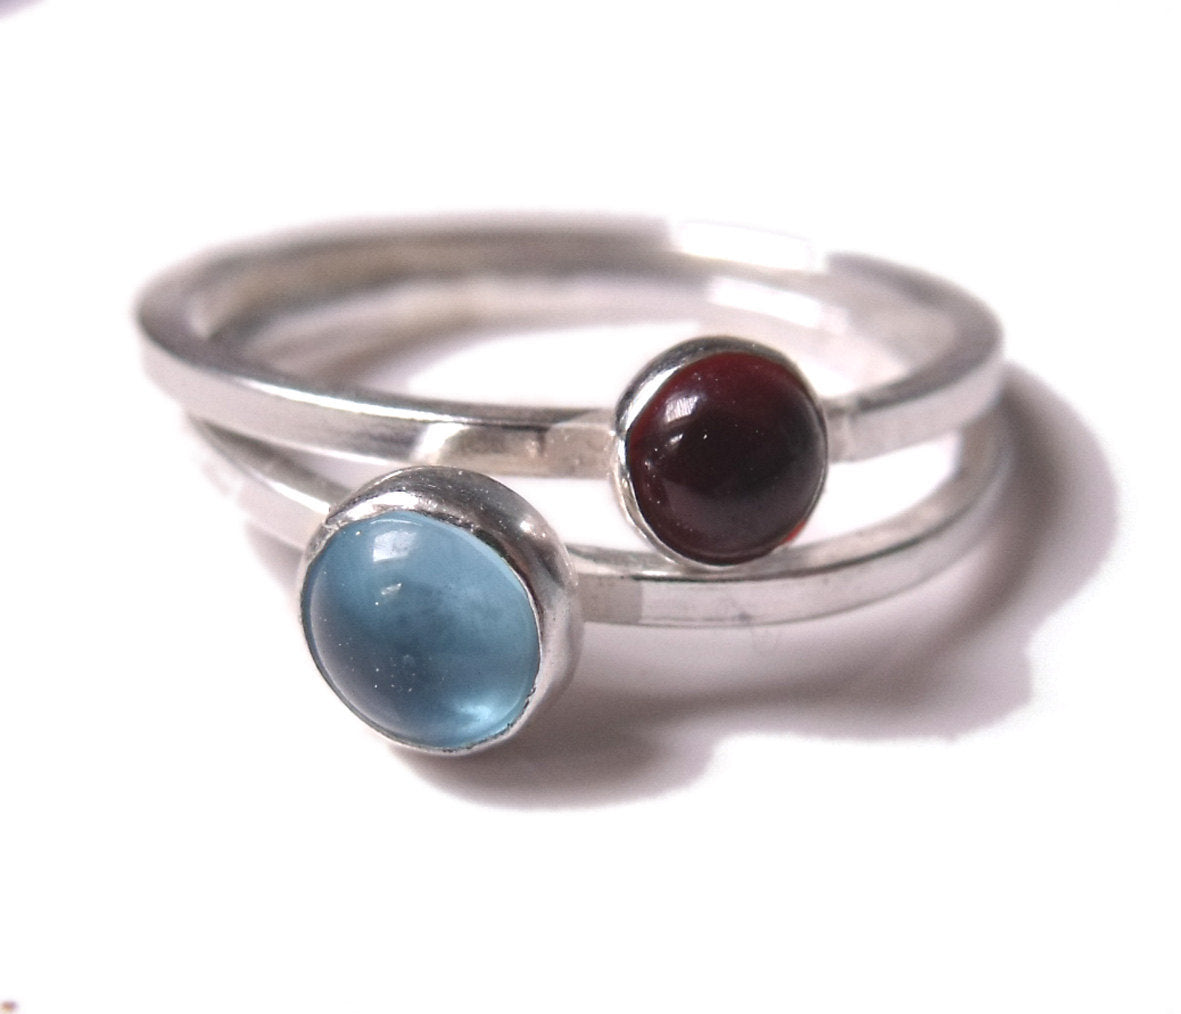 set of two sterling silver Blue Topaz and garnet stacking rings